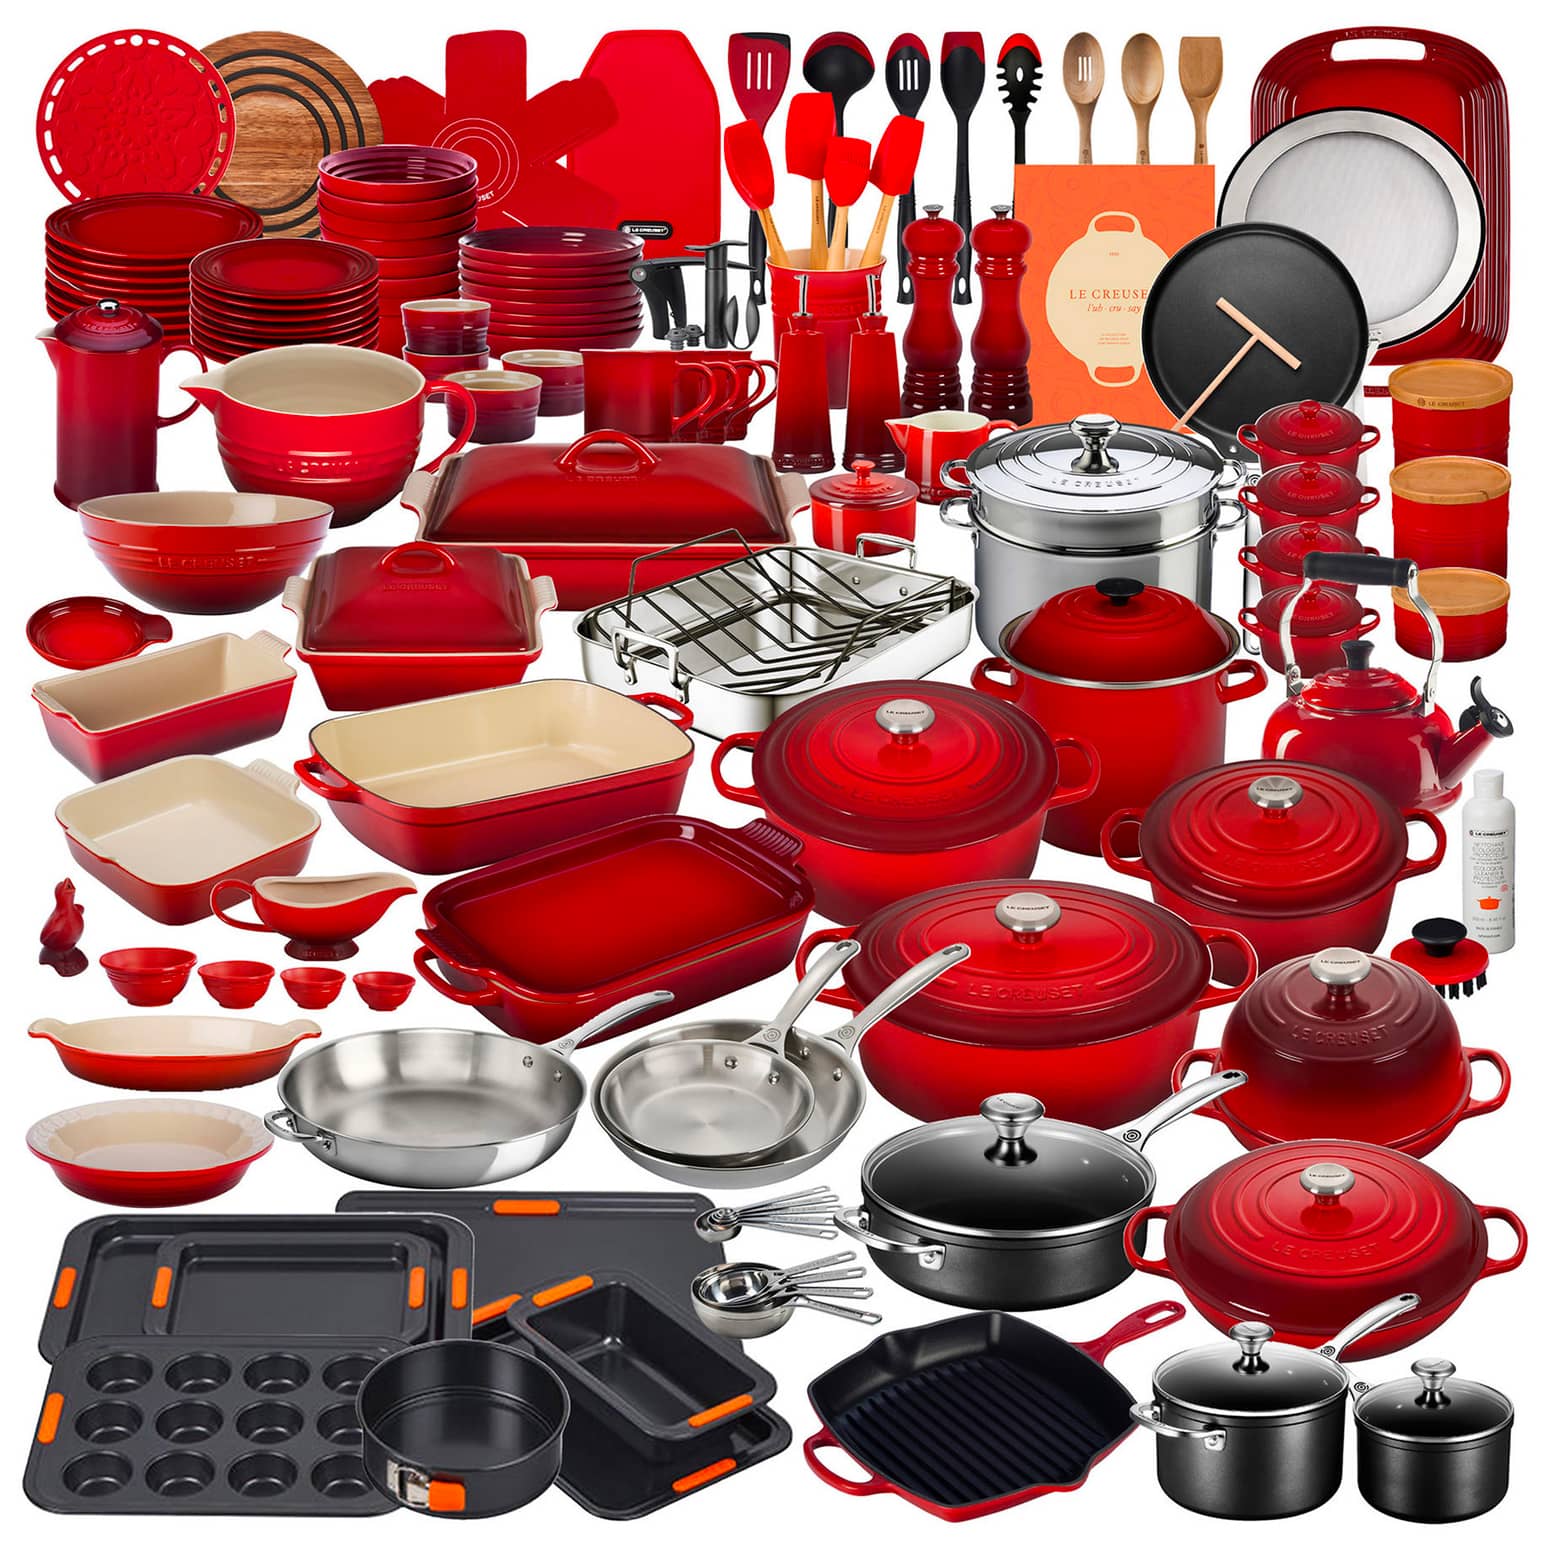 Le Creuset Ultimate Cookware Set - 157 Pieces Delivered on a Pallet!